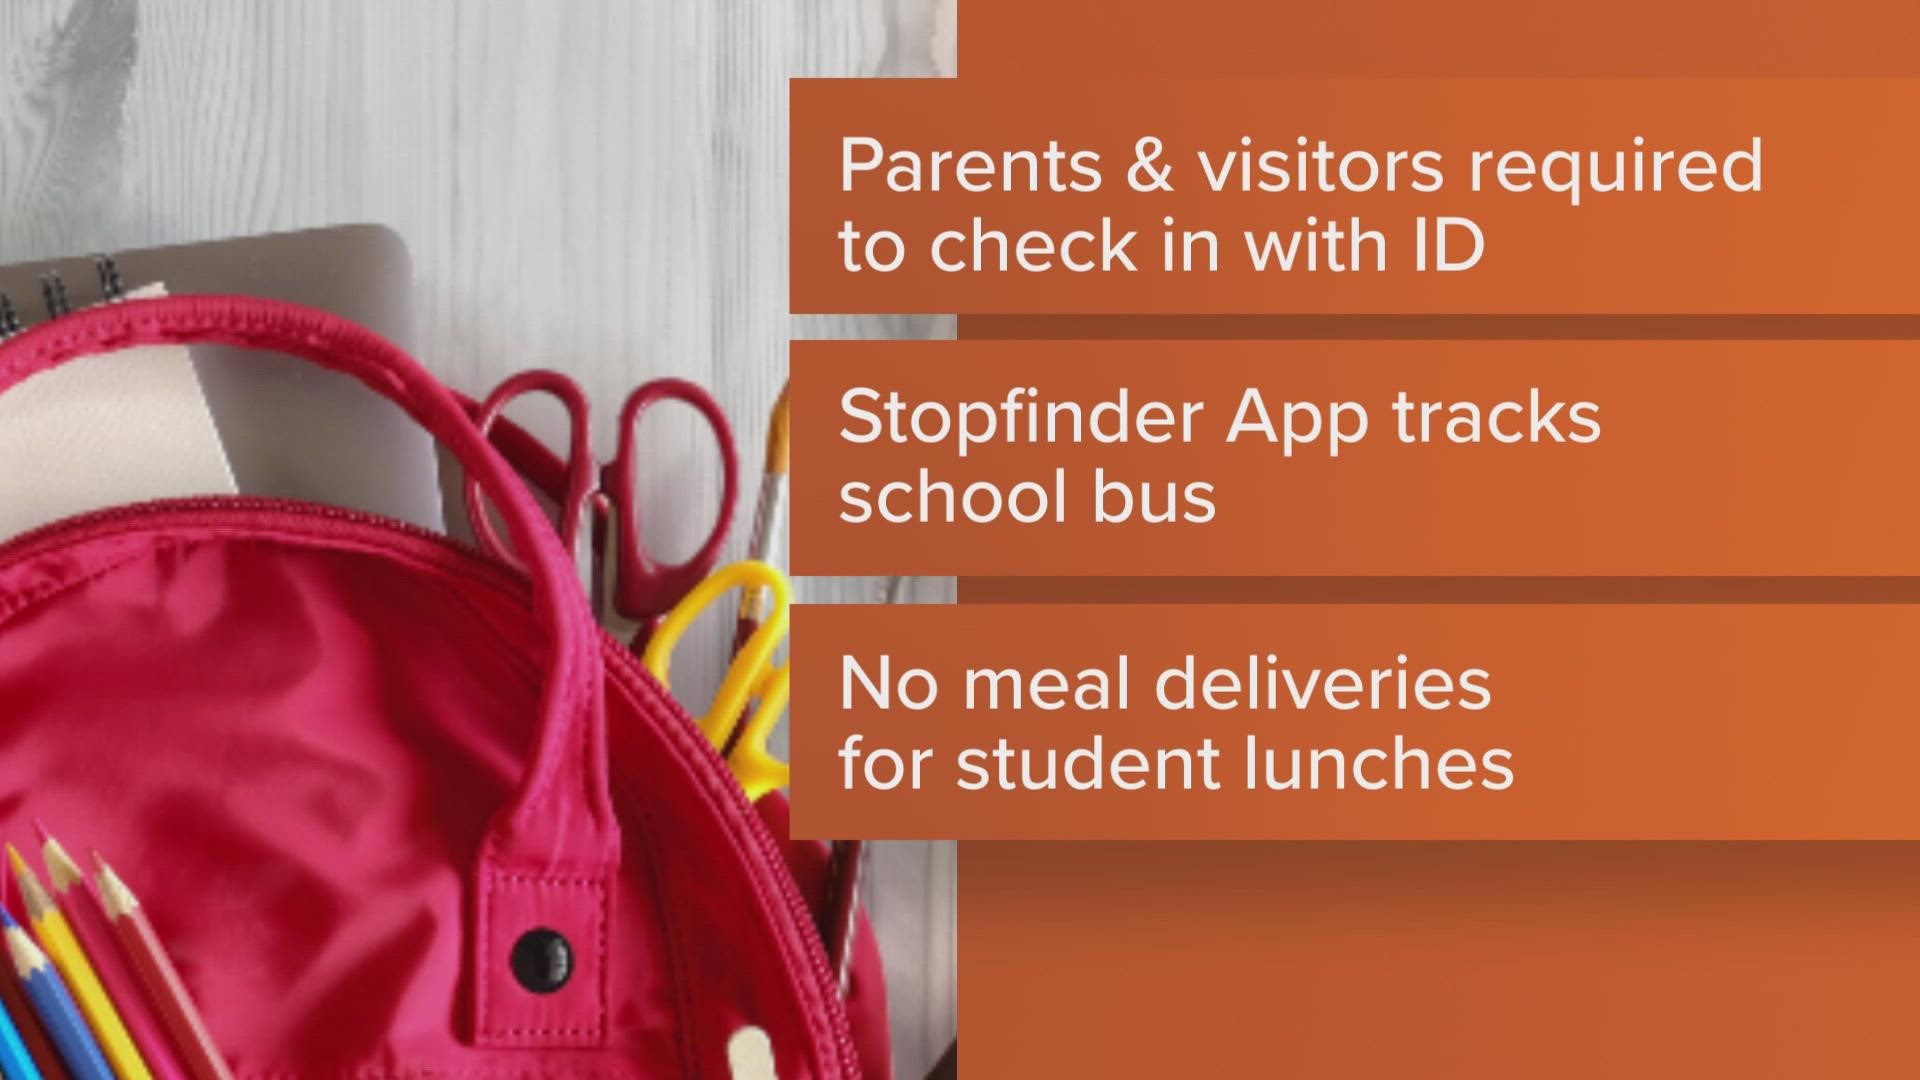 Pflugerville ISD students return to the classroom Tuesday. The district has implemented a lot of new information regarding safety, transportation and lunch services.